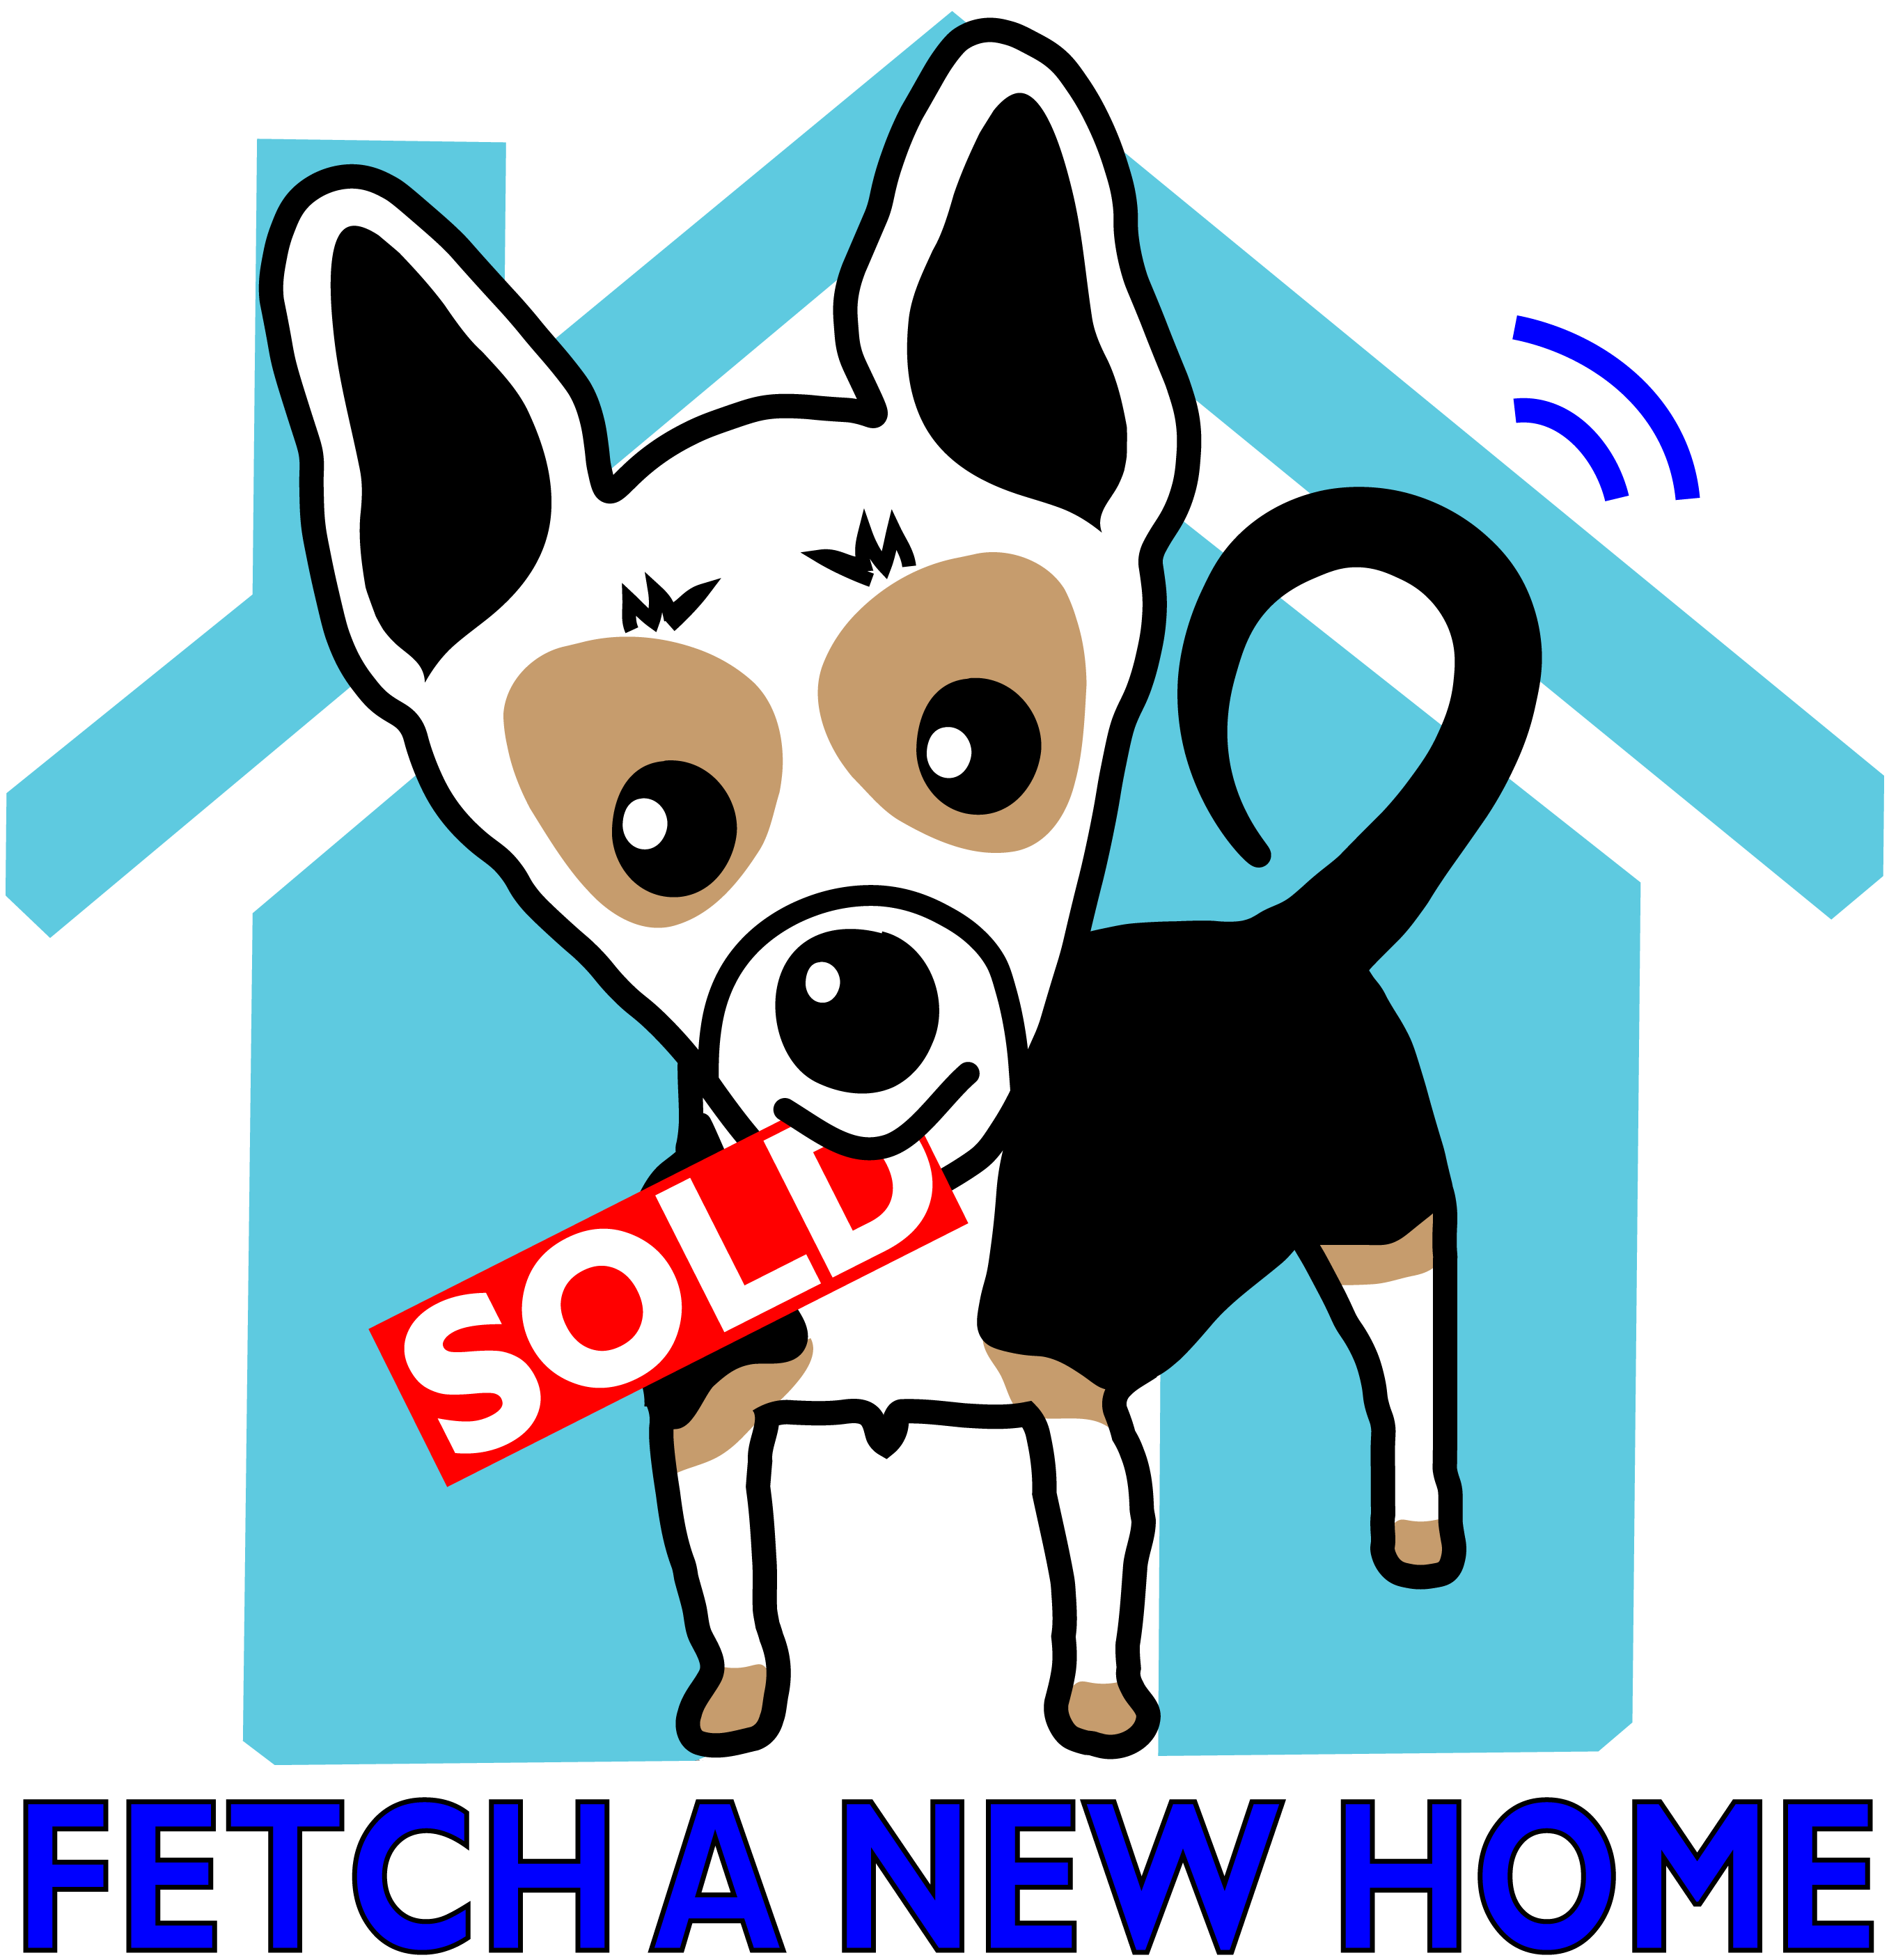 FETCH A NEW HOME | Indian River County Real Estate